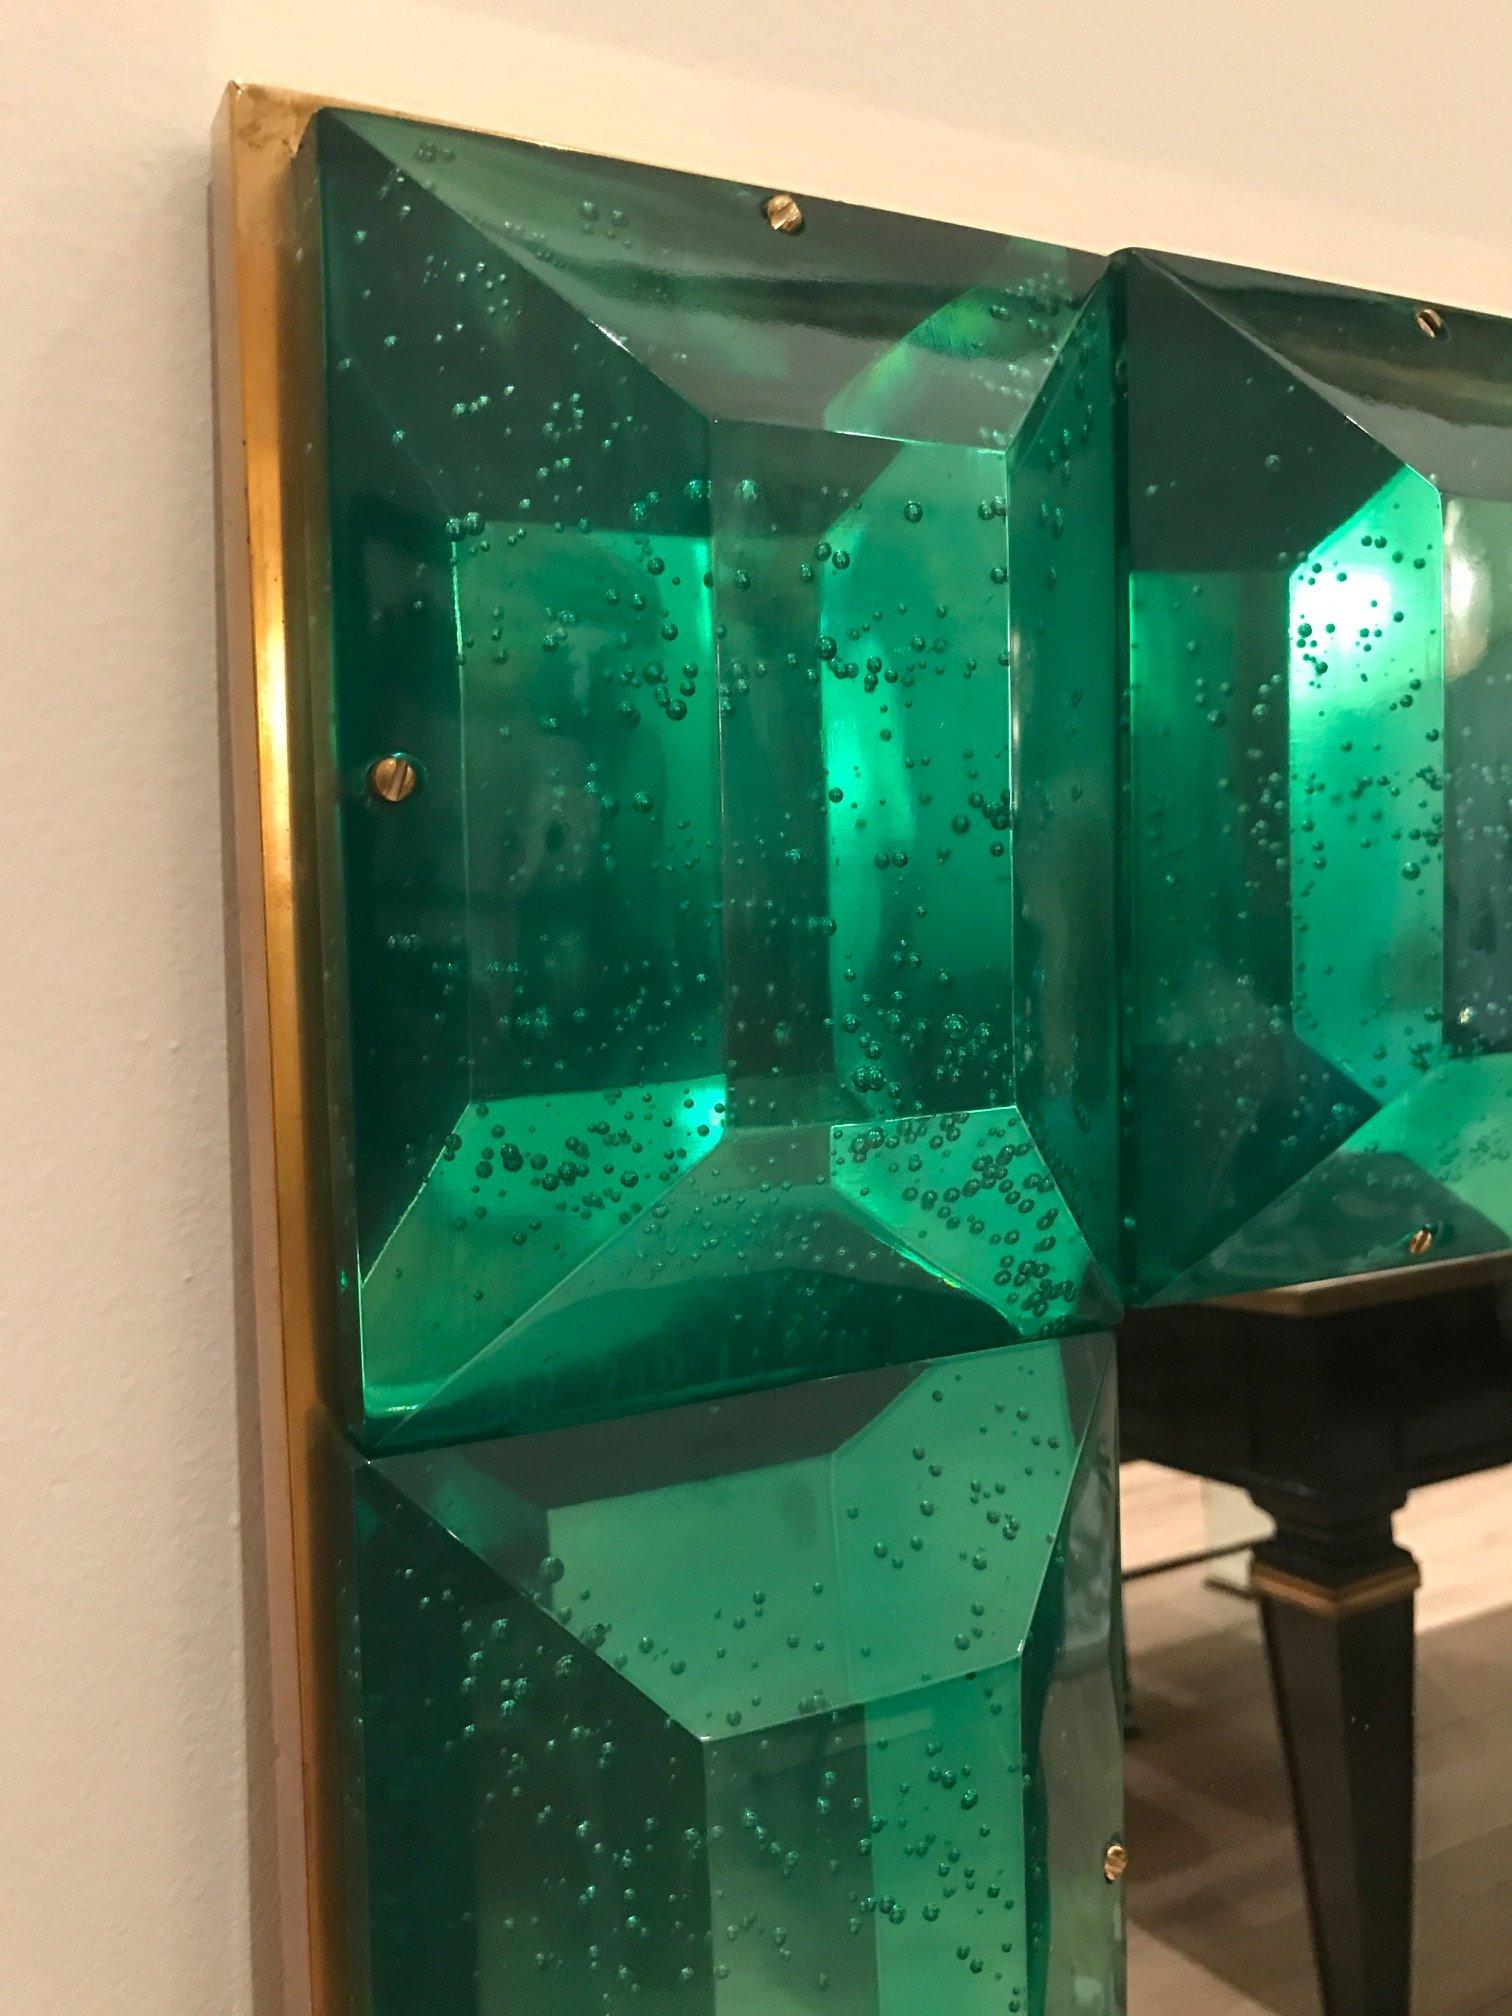  Customizable emerald green diamond cut Murano glass mirror.
 Vivid and intense emerald green glass block with naturally occurring air inclusions throughout 
 Highly polished faceted pattern
 Brass accents
 Luxury handcrafted by a team of artisans